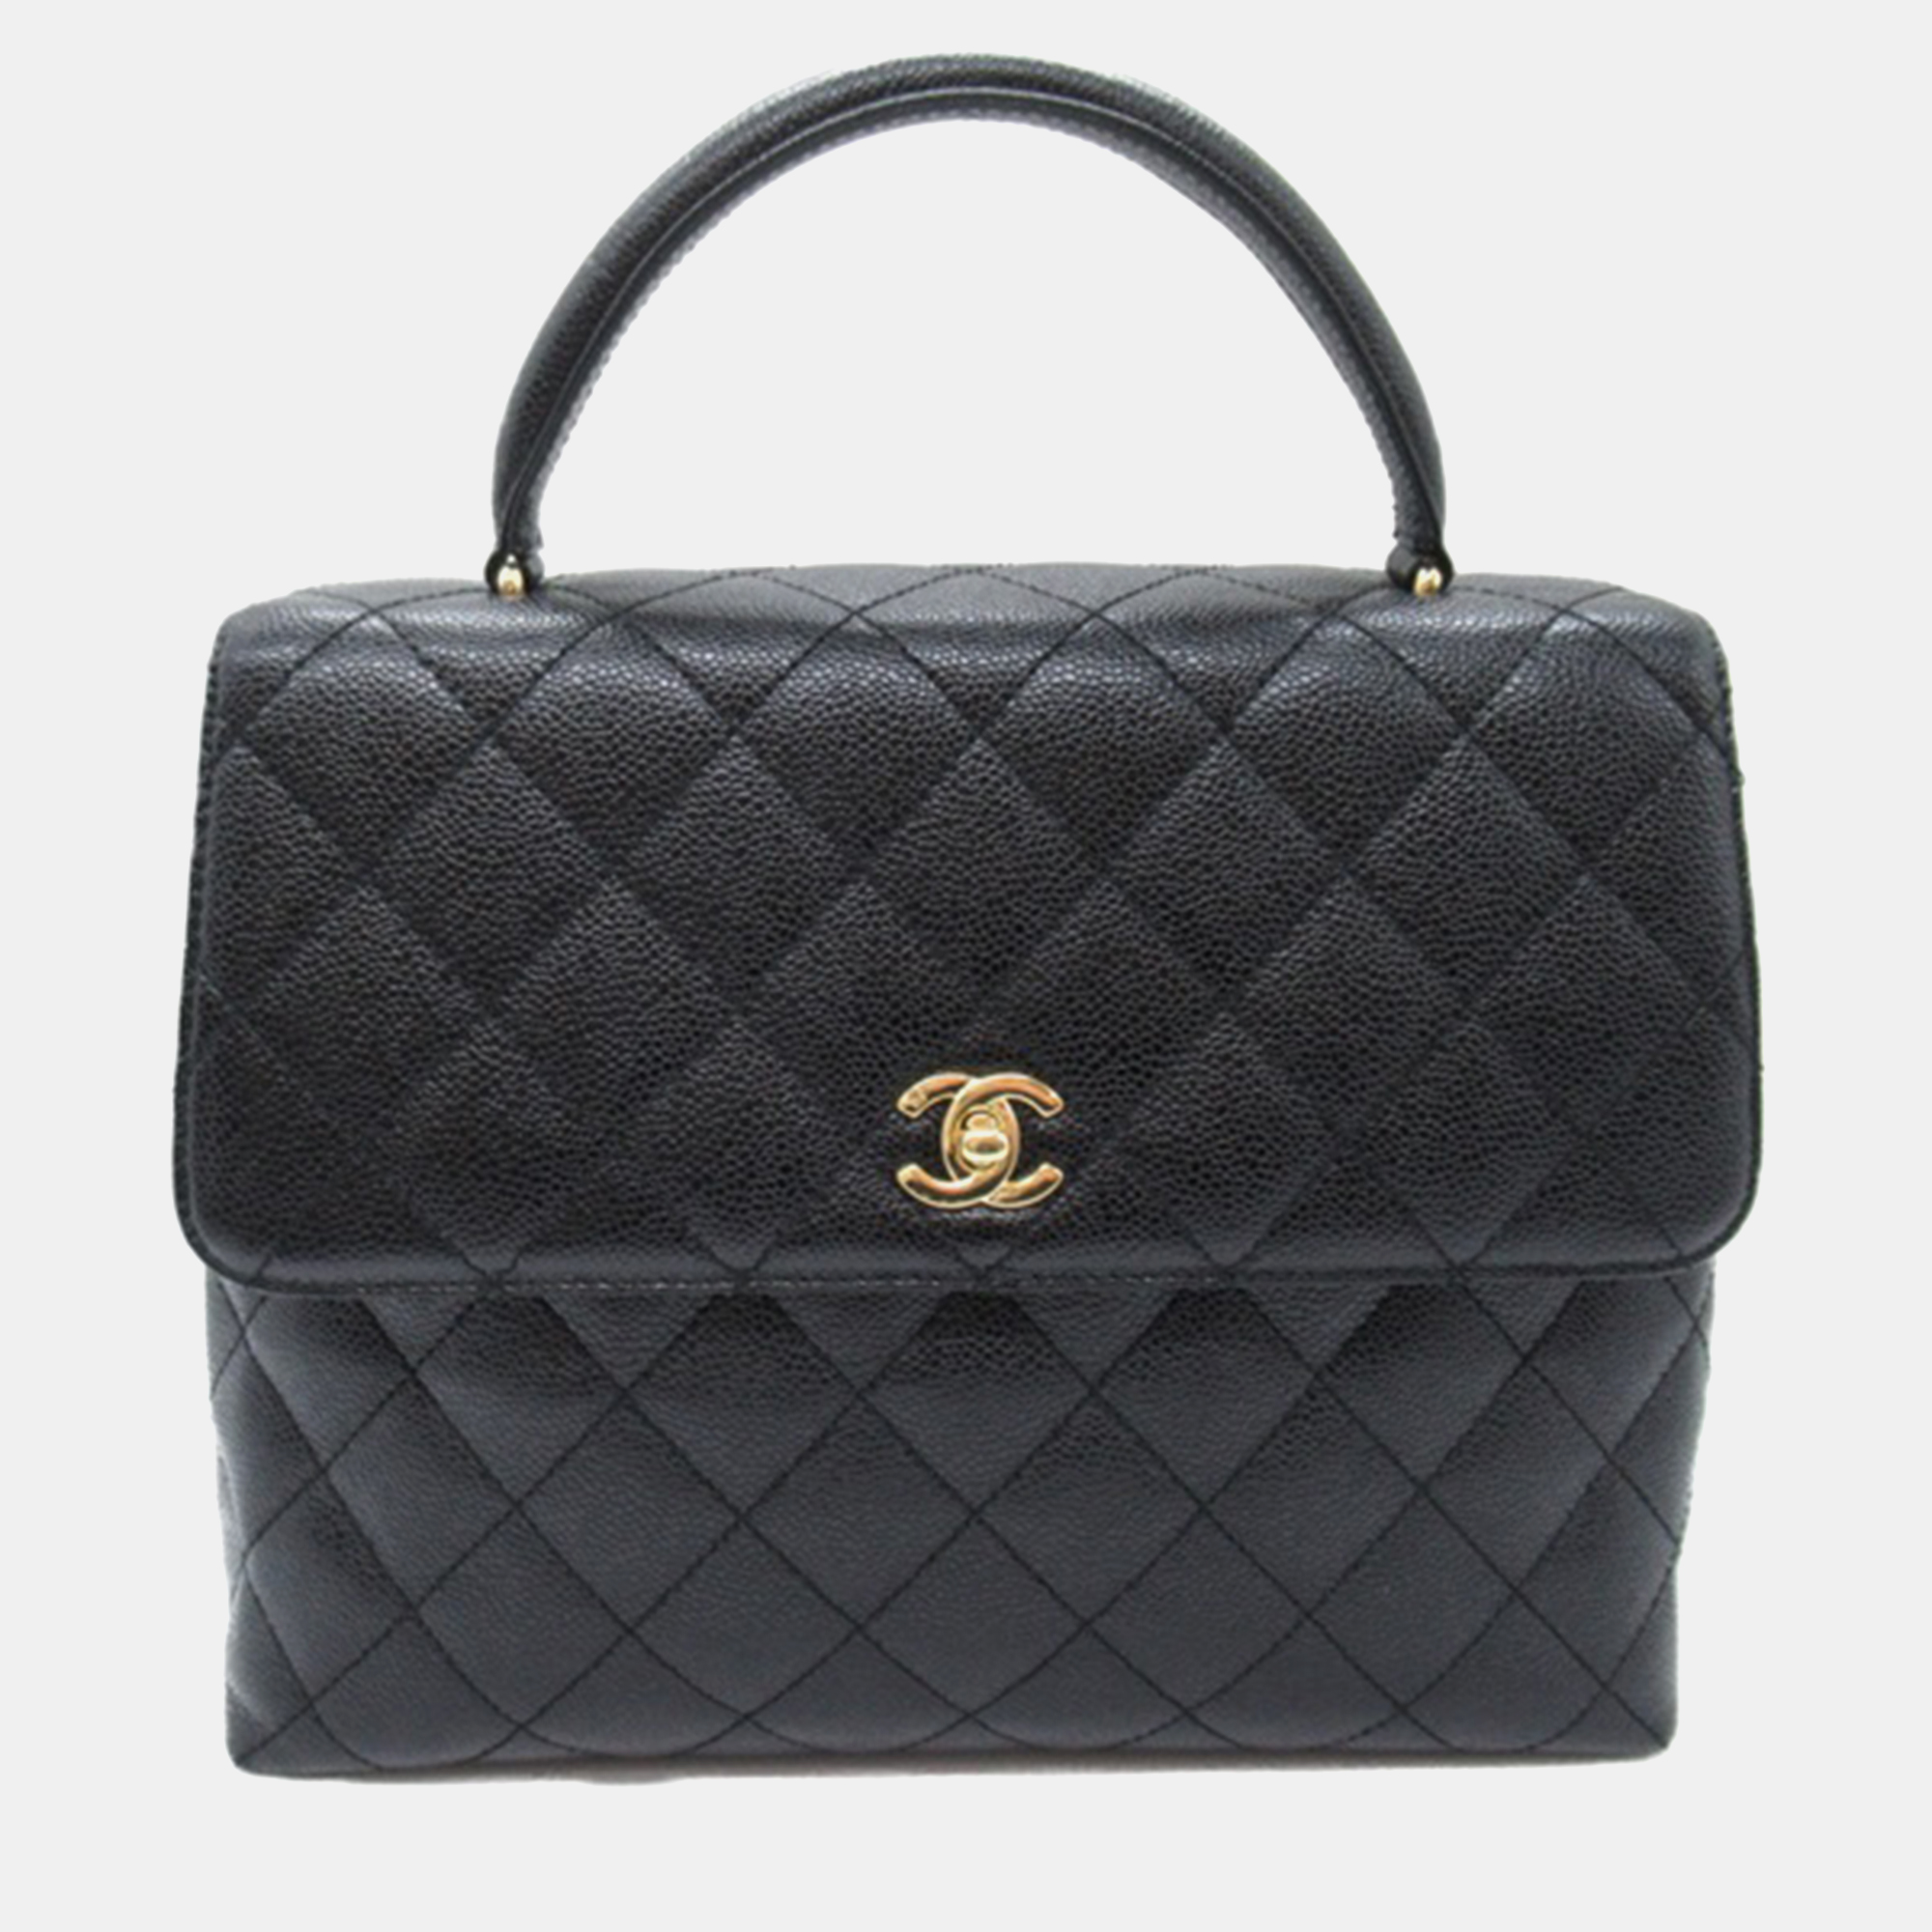 Chanel black leather  kelly top handle bags